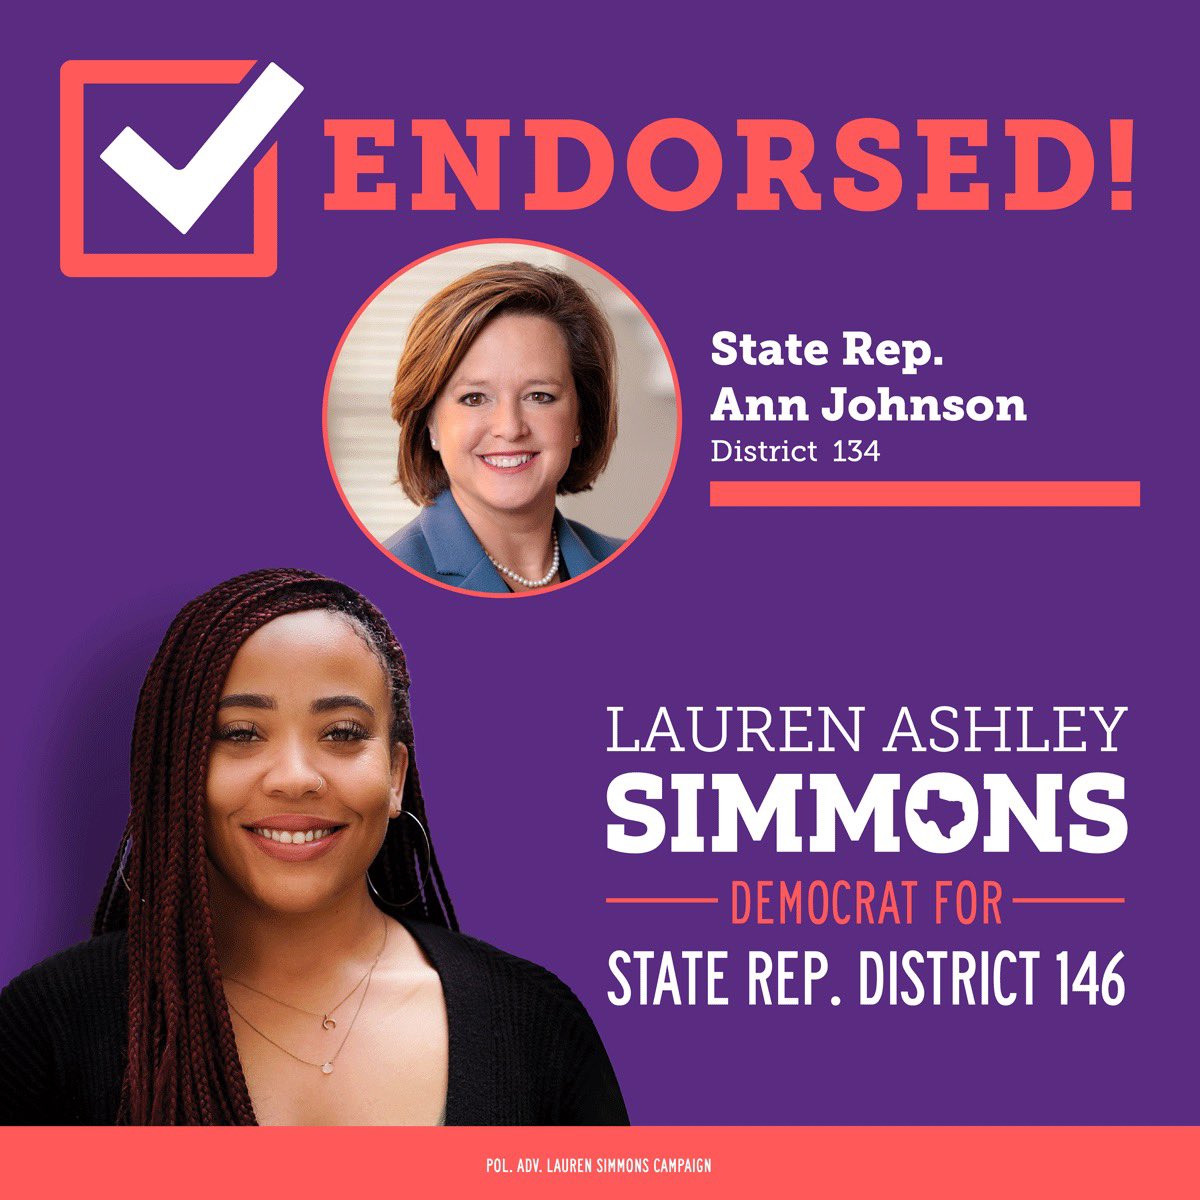 I am so proud of this endorsement. State Rep. Ann Johnson is the gold standard when it comes to Democrats who work across the aisle to improve lives WITHOUT compromising our core values. Thank you, Rep. Johnson! #HD146 #txlege